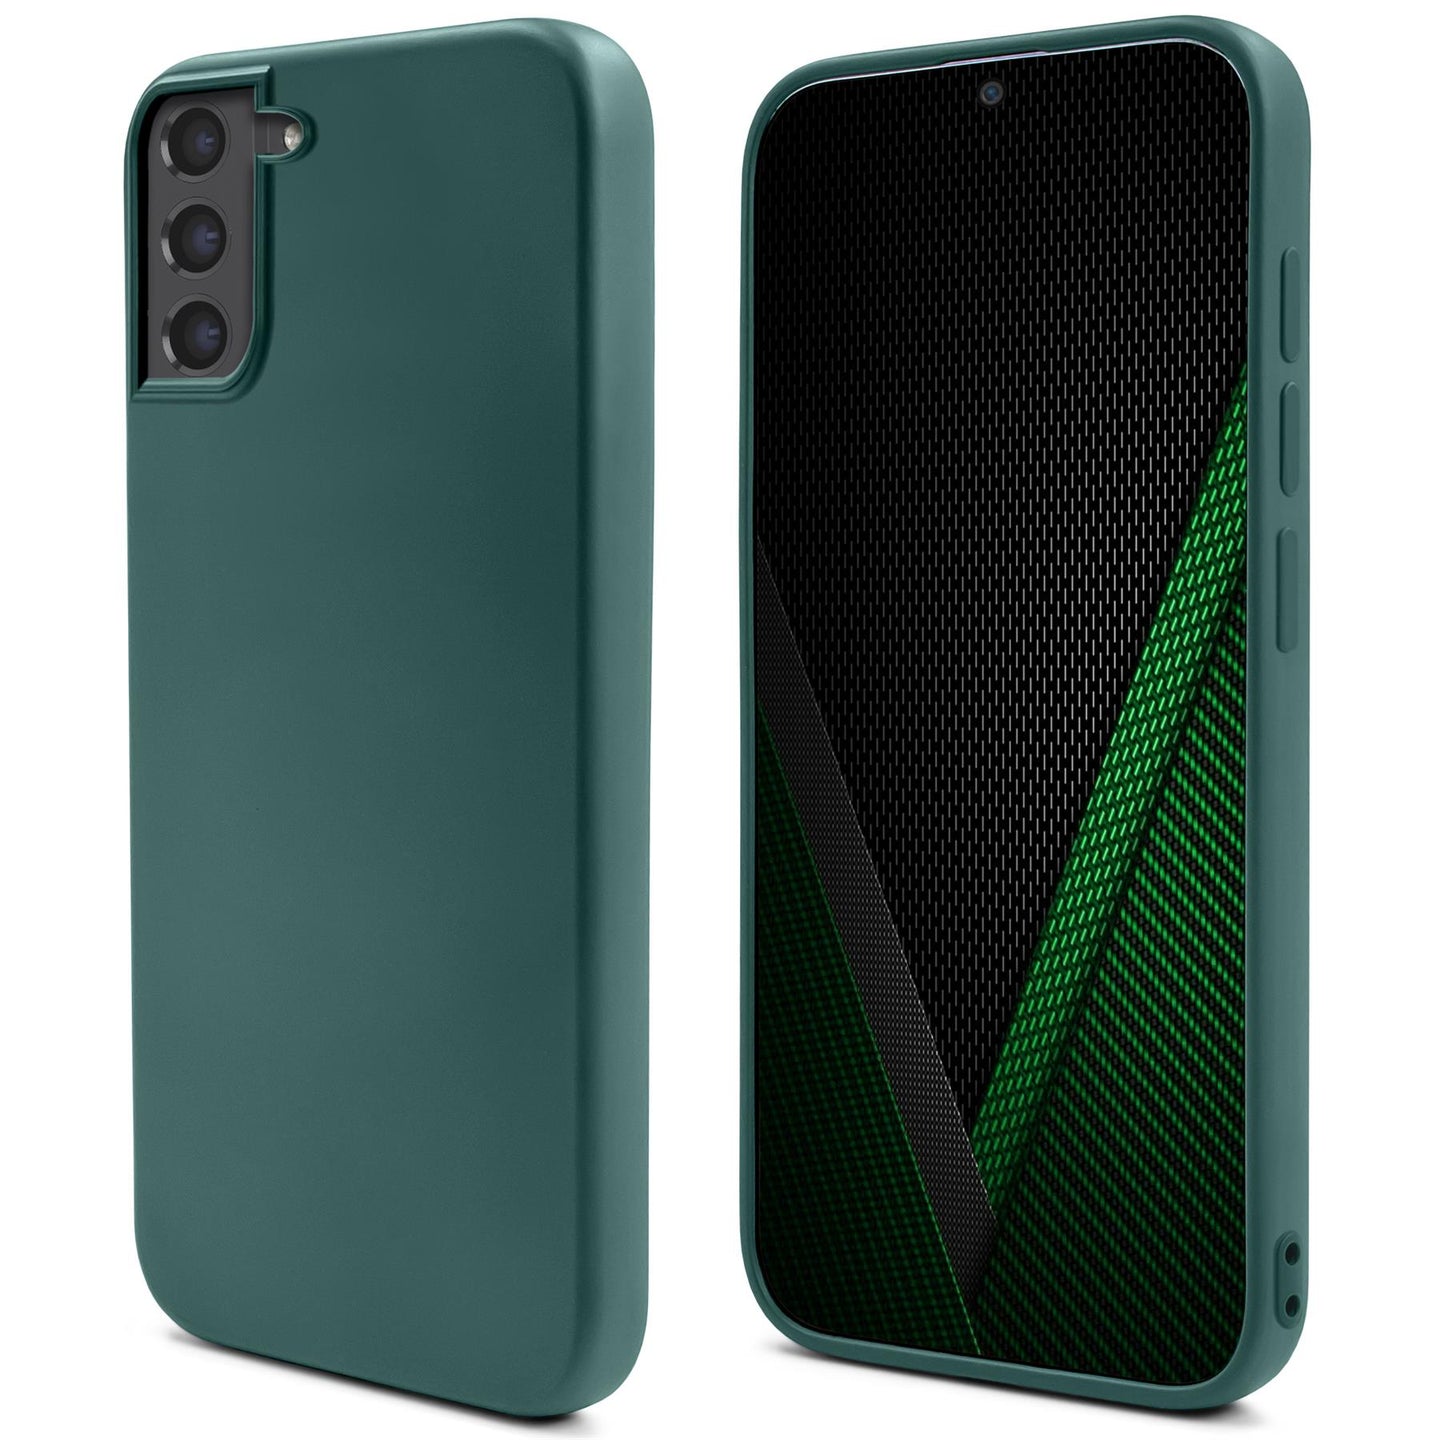 Moozy Lifestyle. Silicone Case for Samsung S22, Dark Green - Liquid Silicone Lightweight Cover with Matte Finish and Soft Microfiber Lining, Premium Silicone Case